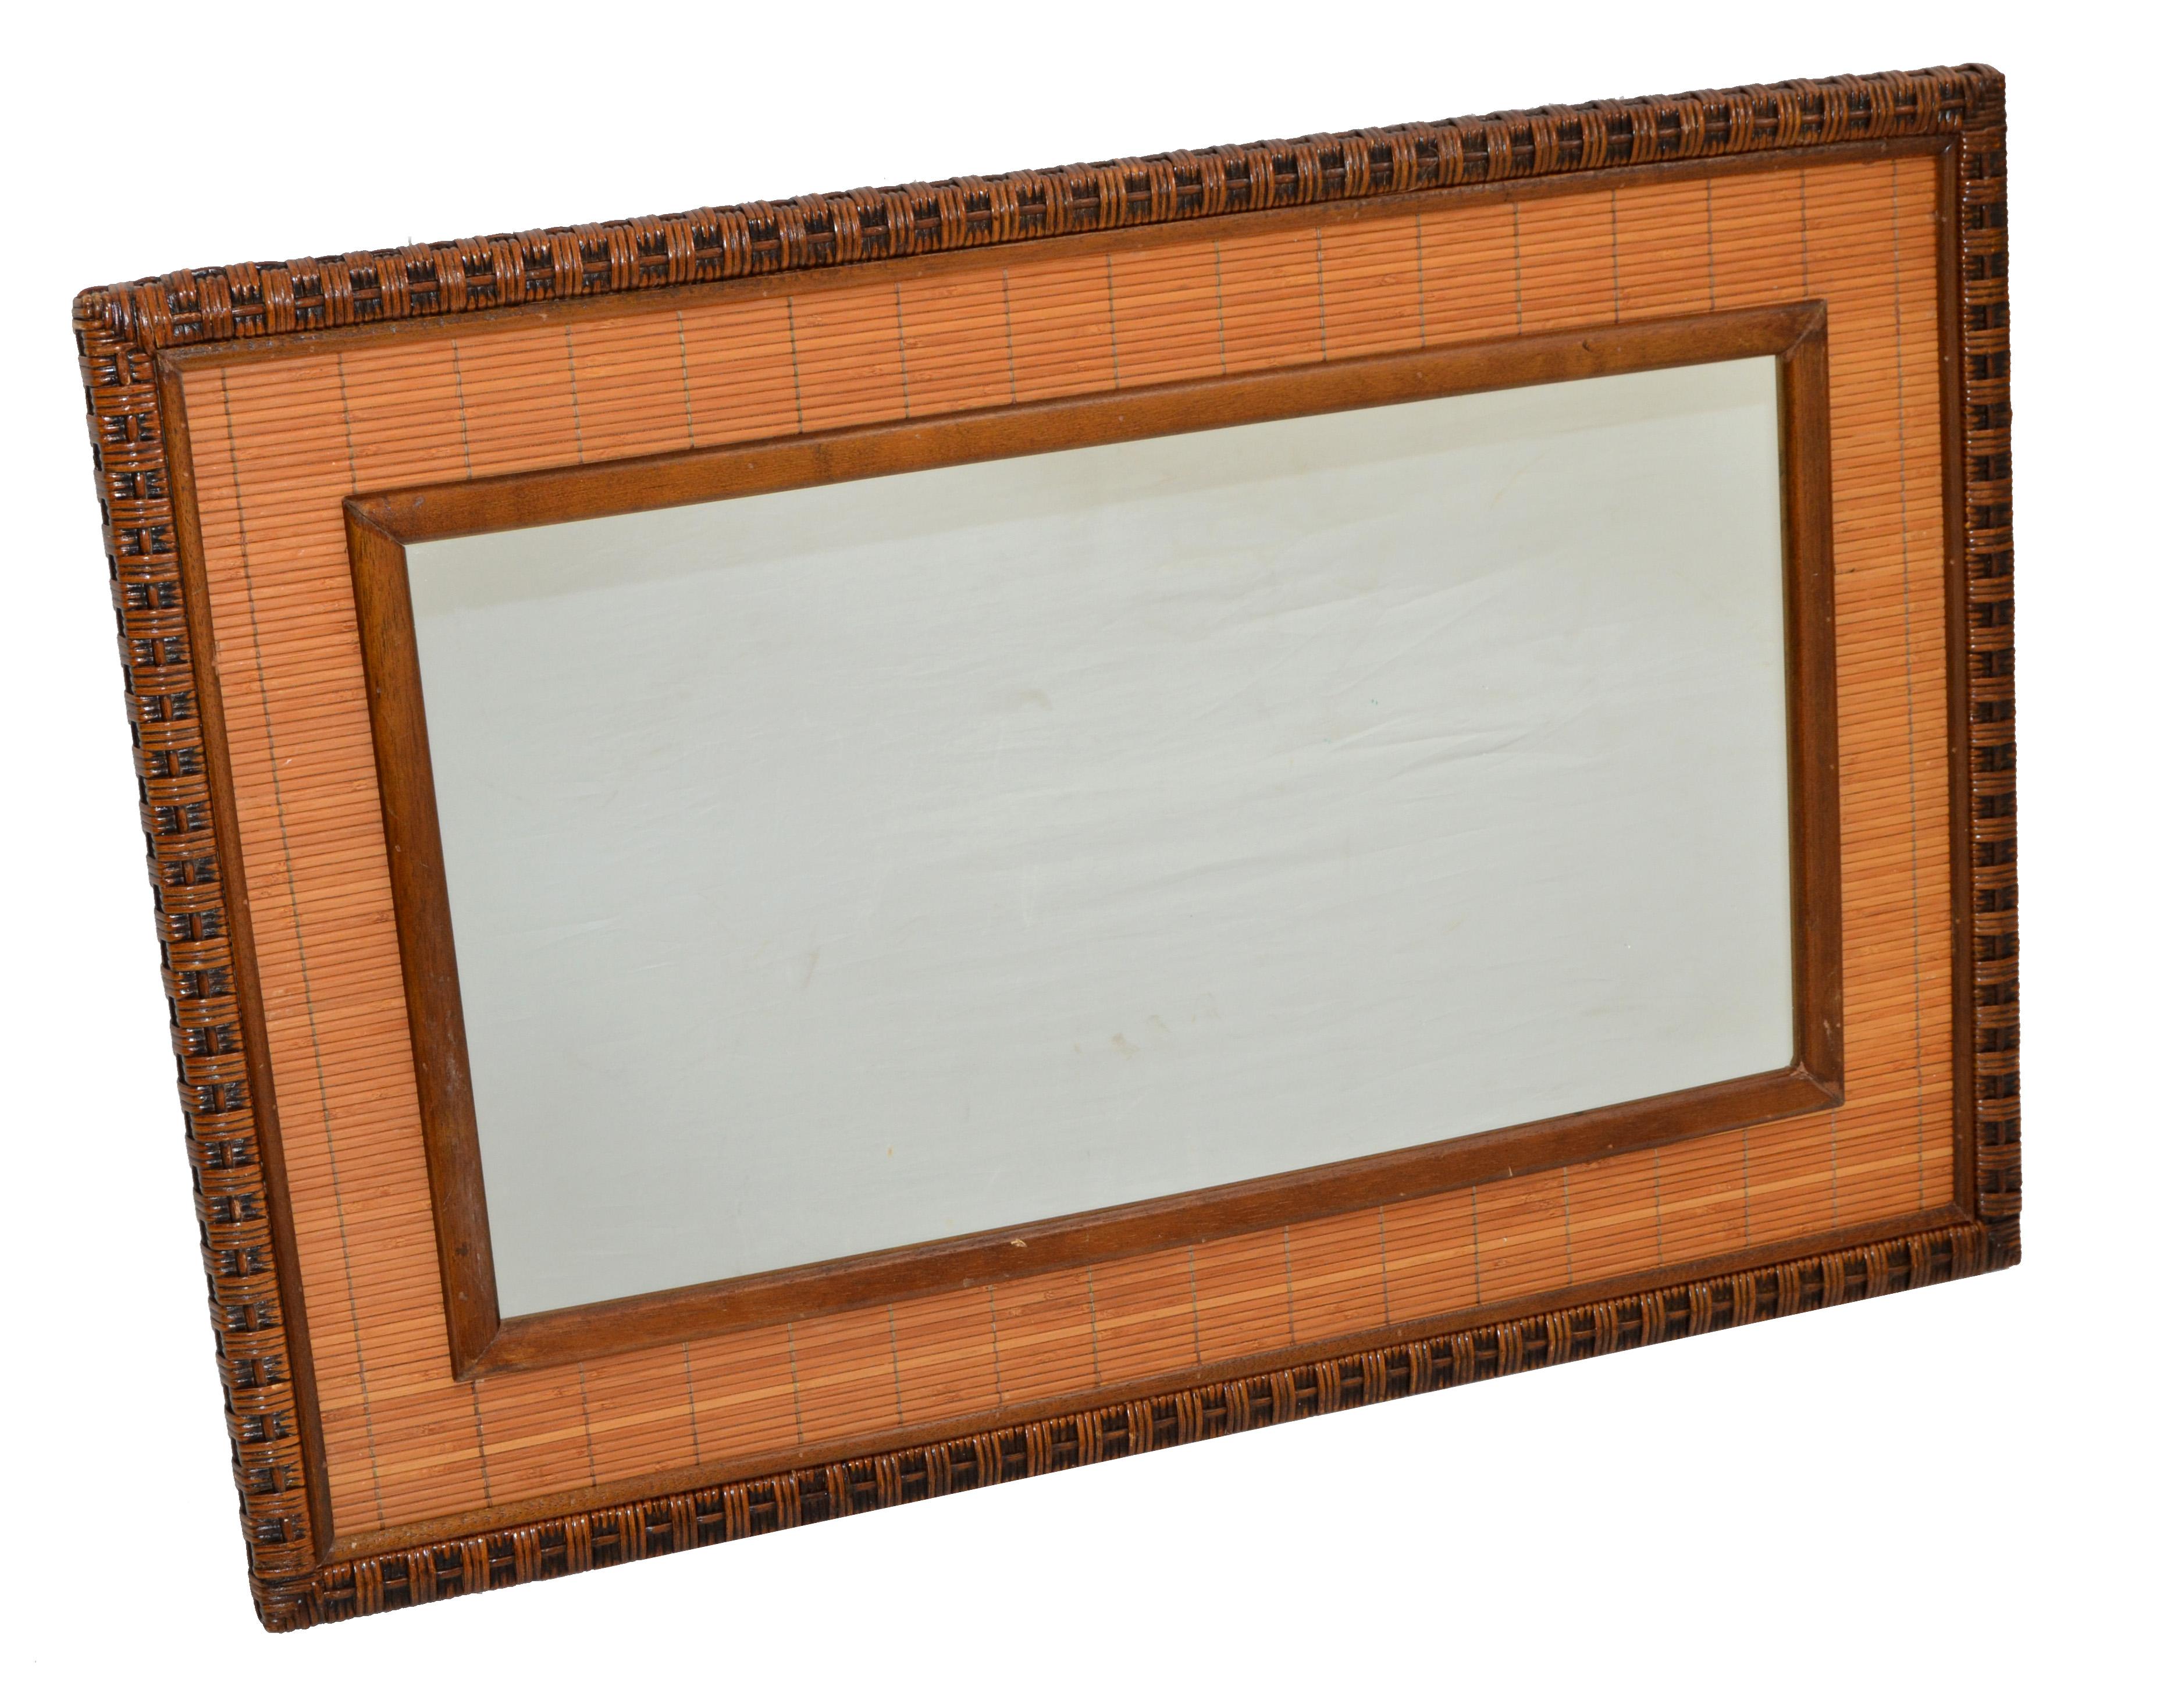 Rectangle Mid-Century Modern Handwoven Rattan Wicker Wall Mirror Boho Chic 1979 For Sale 1